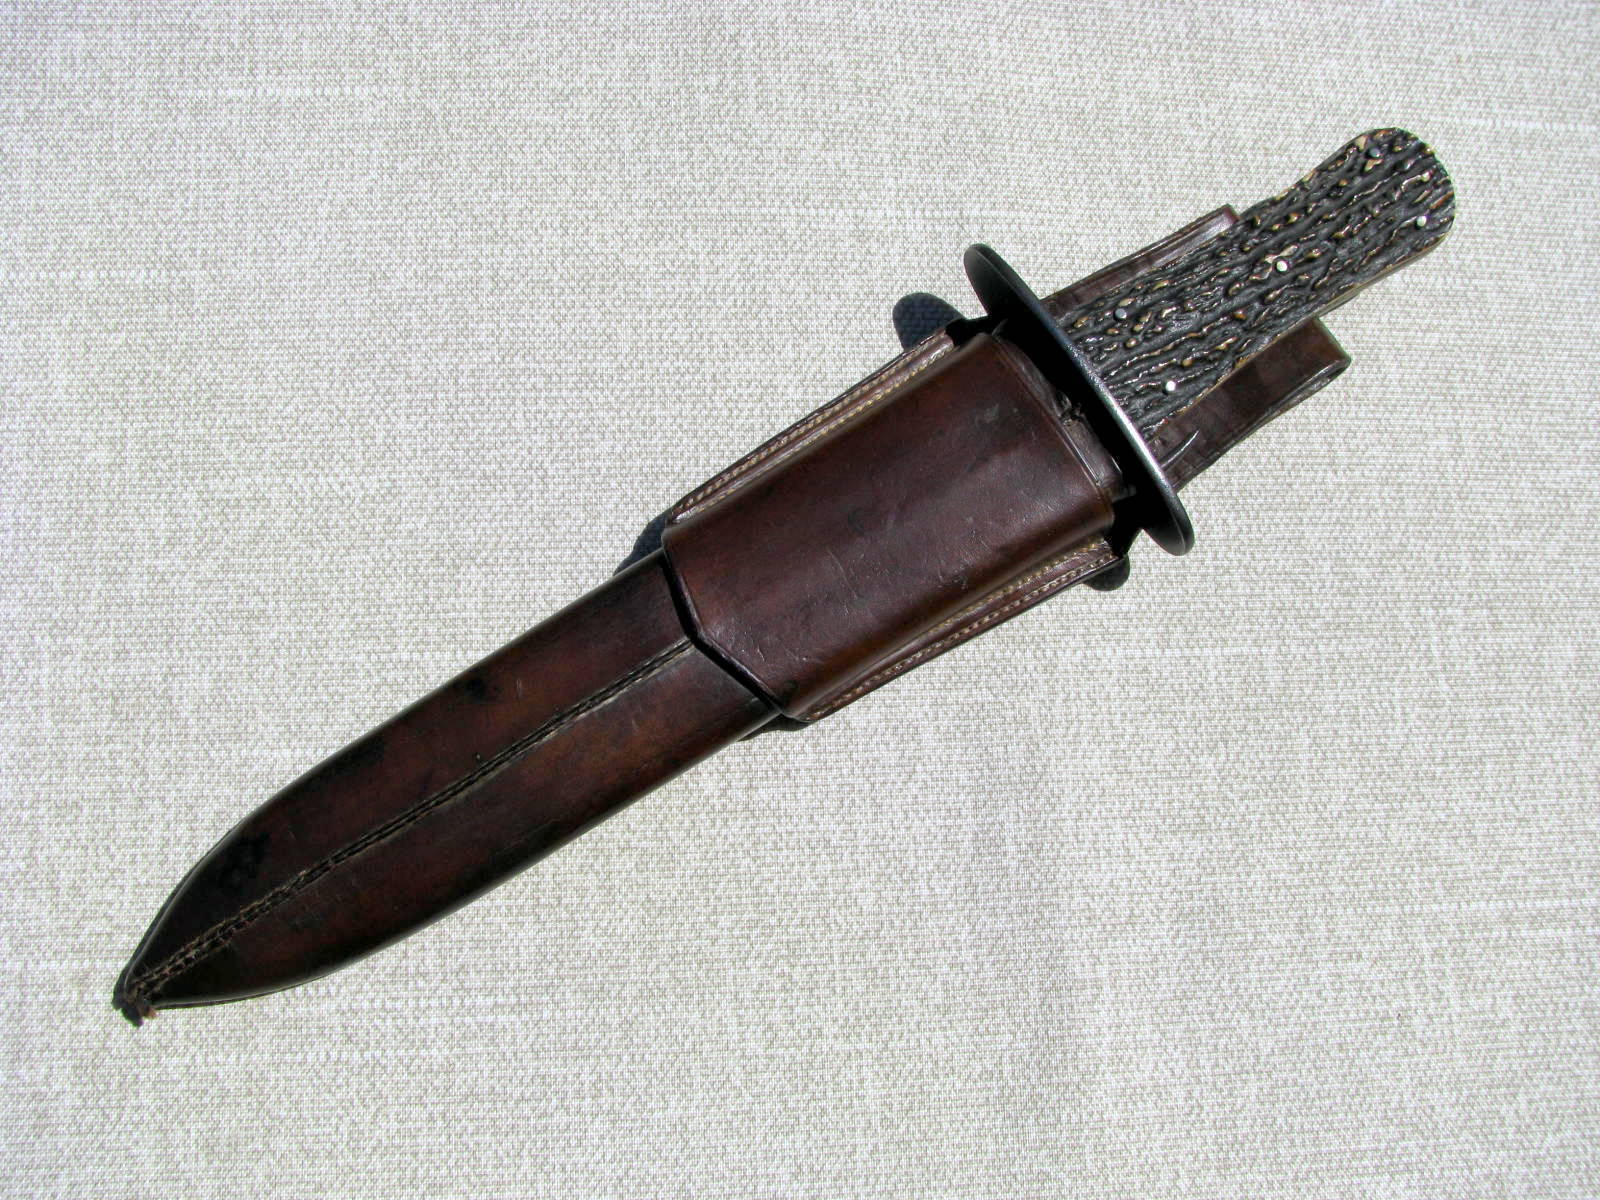 LARGE AND HEAVY, FINE QUALITY, RARE, ENGLISH, HUNTING OR FIGHTING BOWIE 1800s***